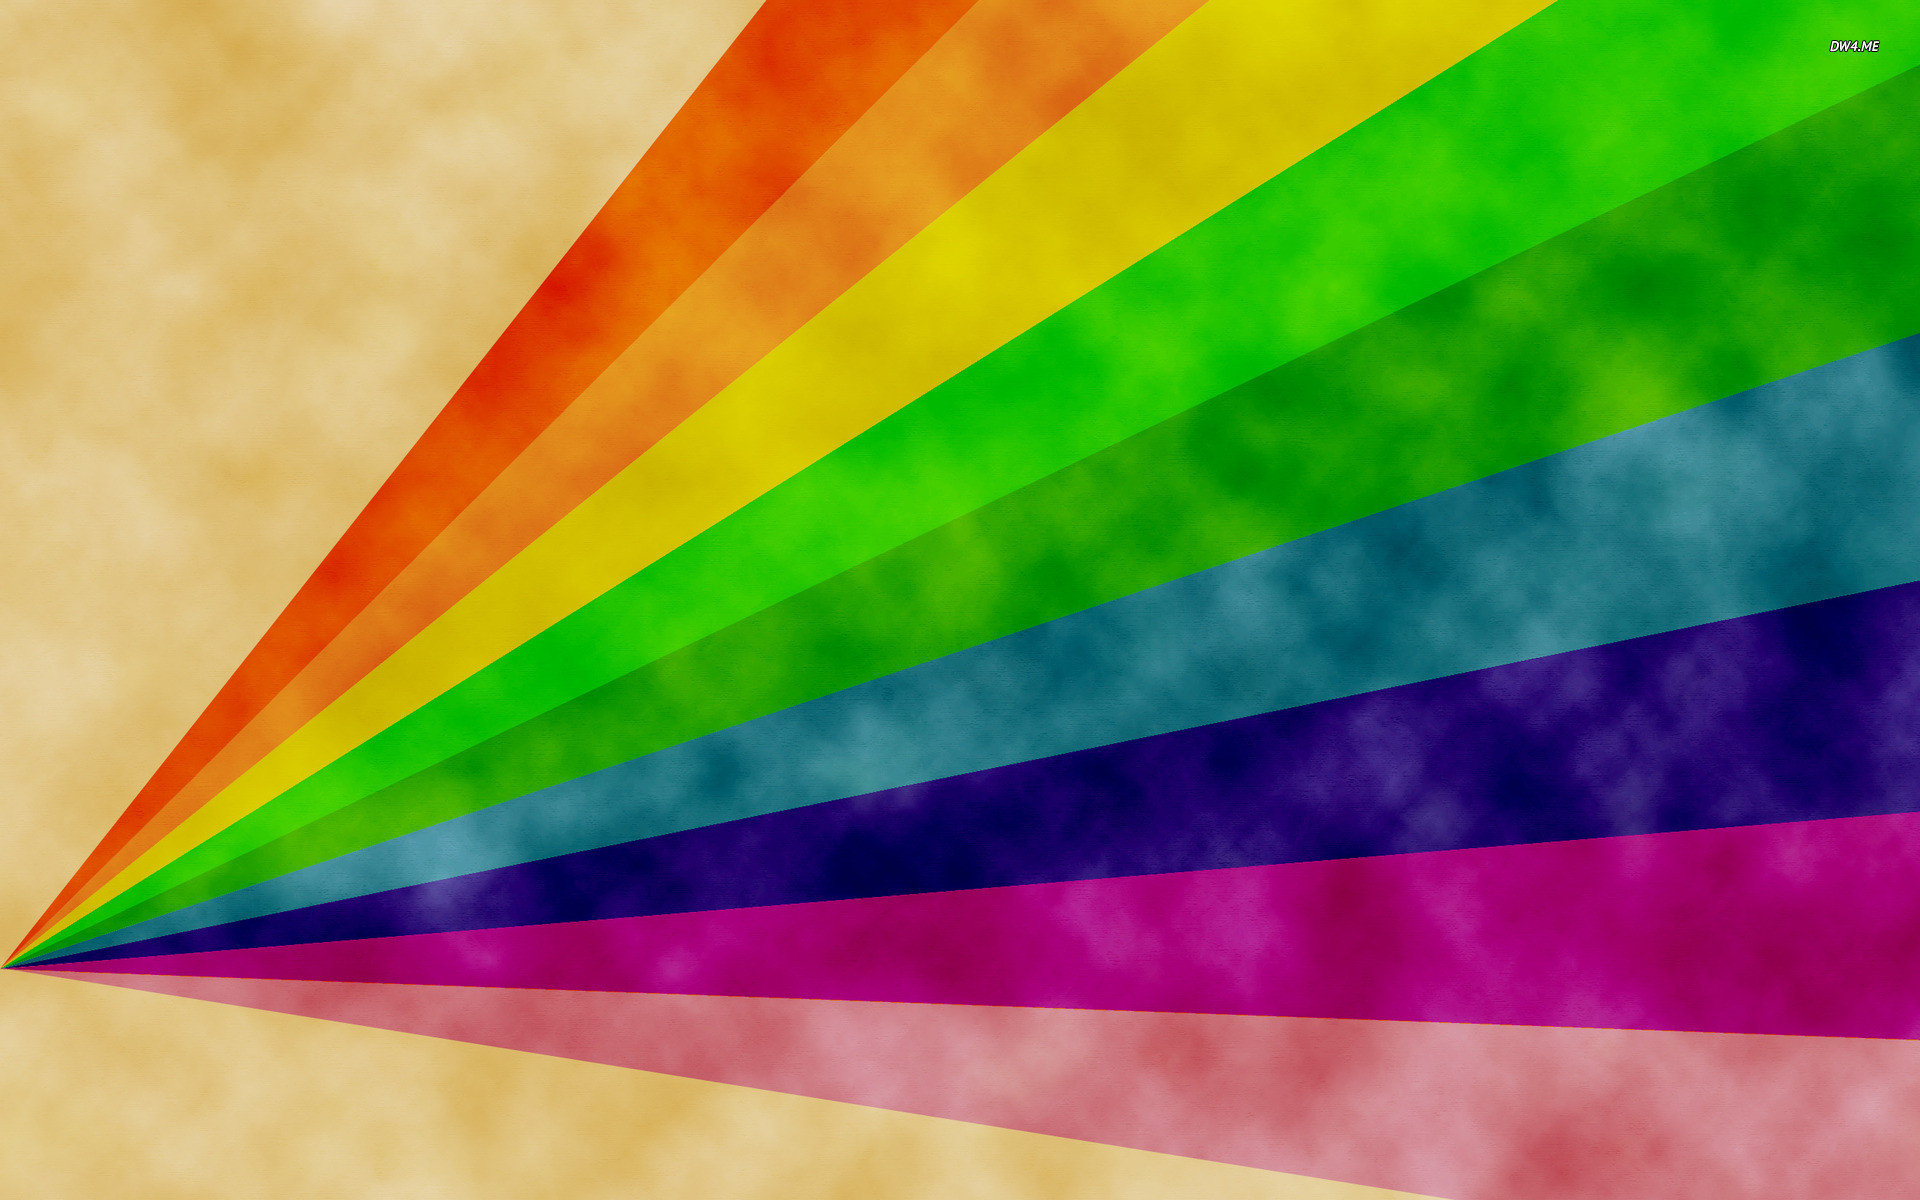 1920x1200 Rainbow on paper wallpaper - Abstract wallpapers - #150